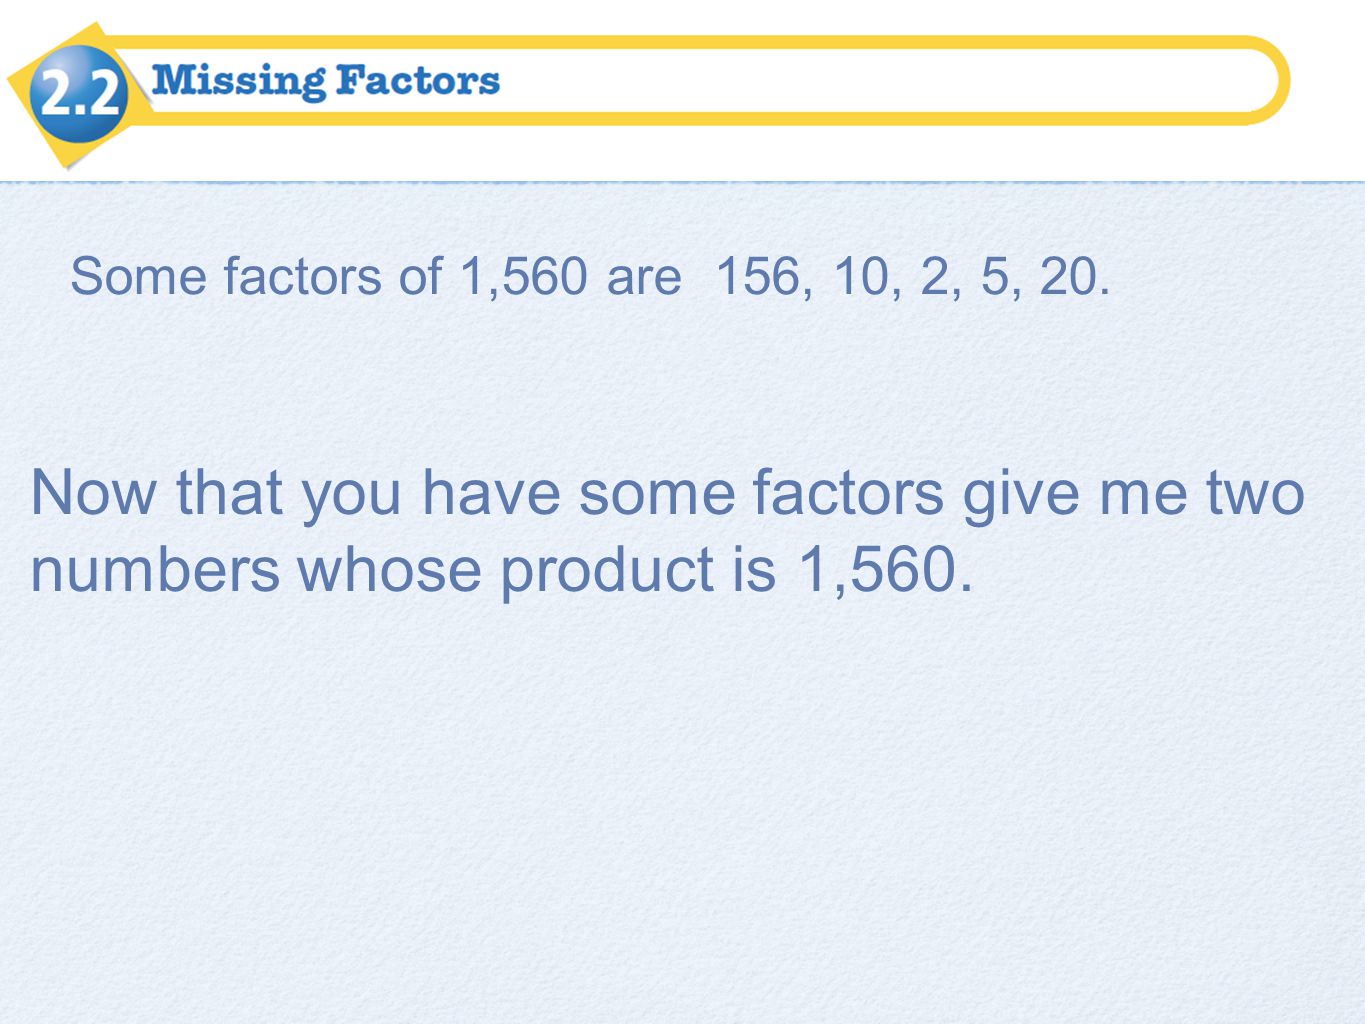 Some factors of 1,560 are 156, 10, 2, 5, 20.